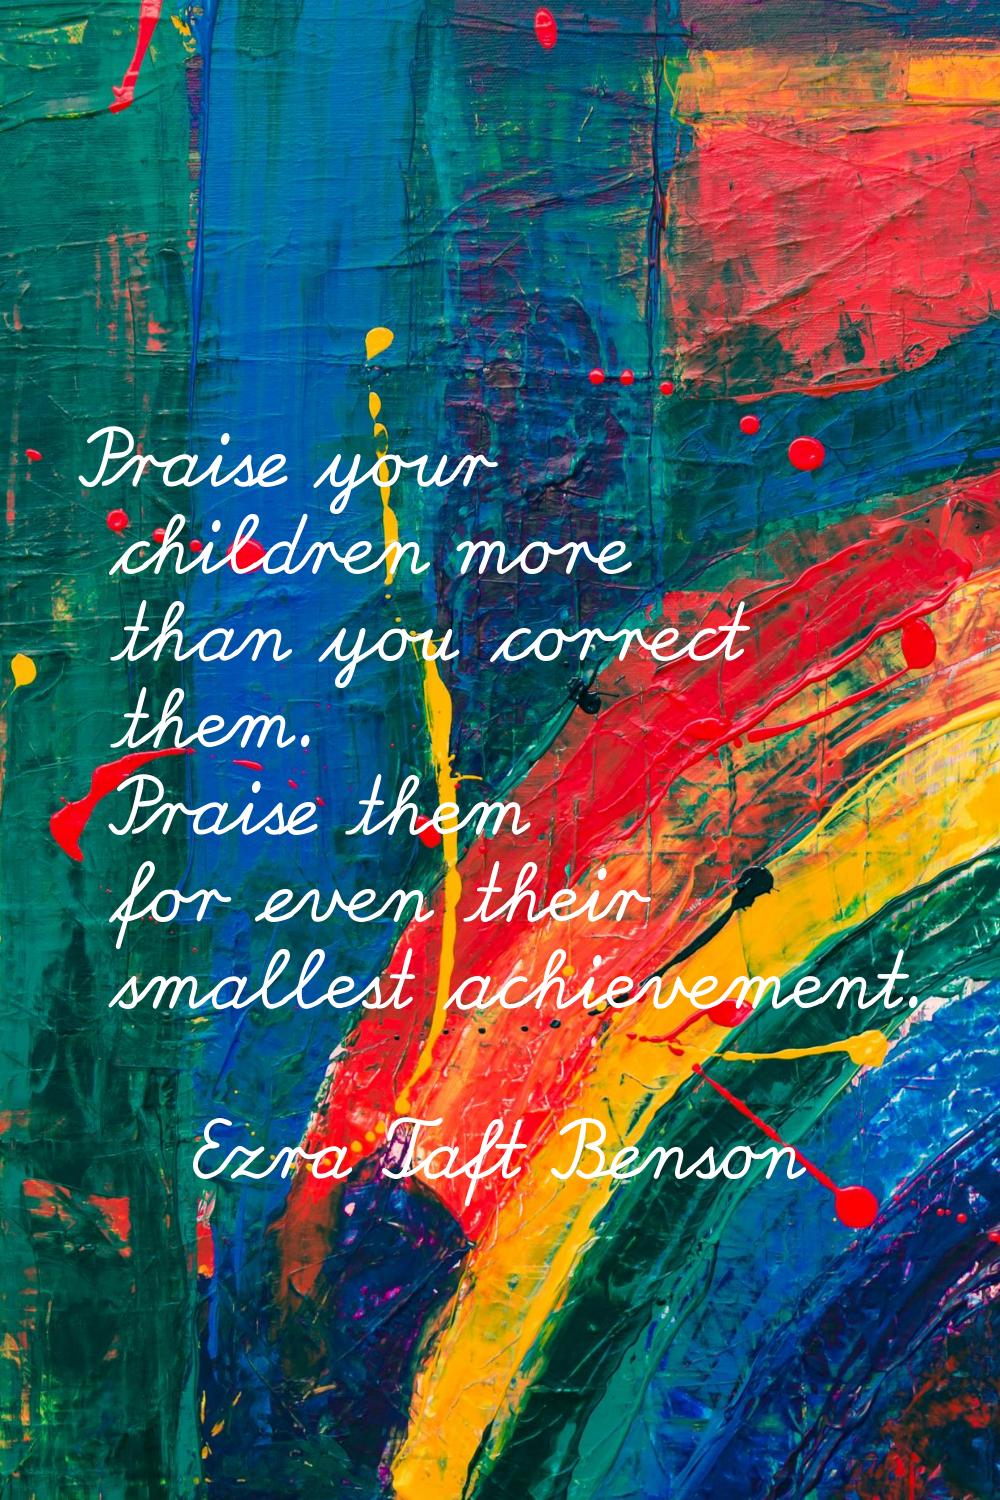 Praise your children more than you correct them. Praise them for even their smallest achievement.